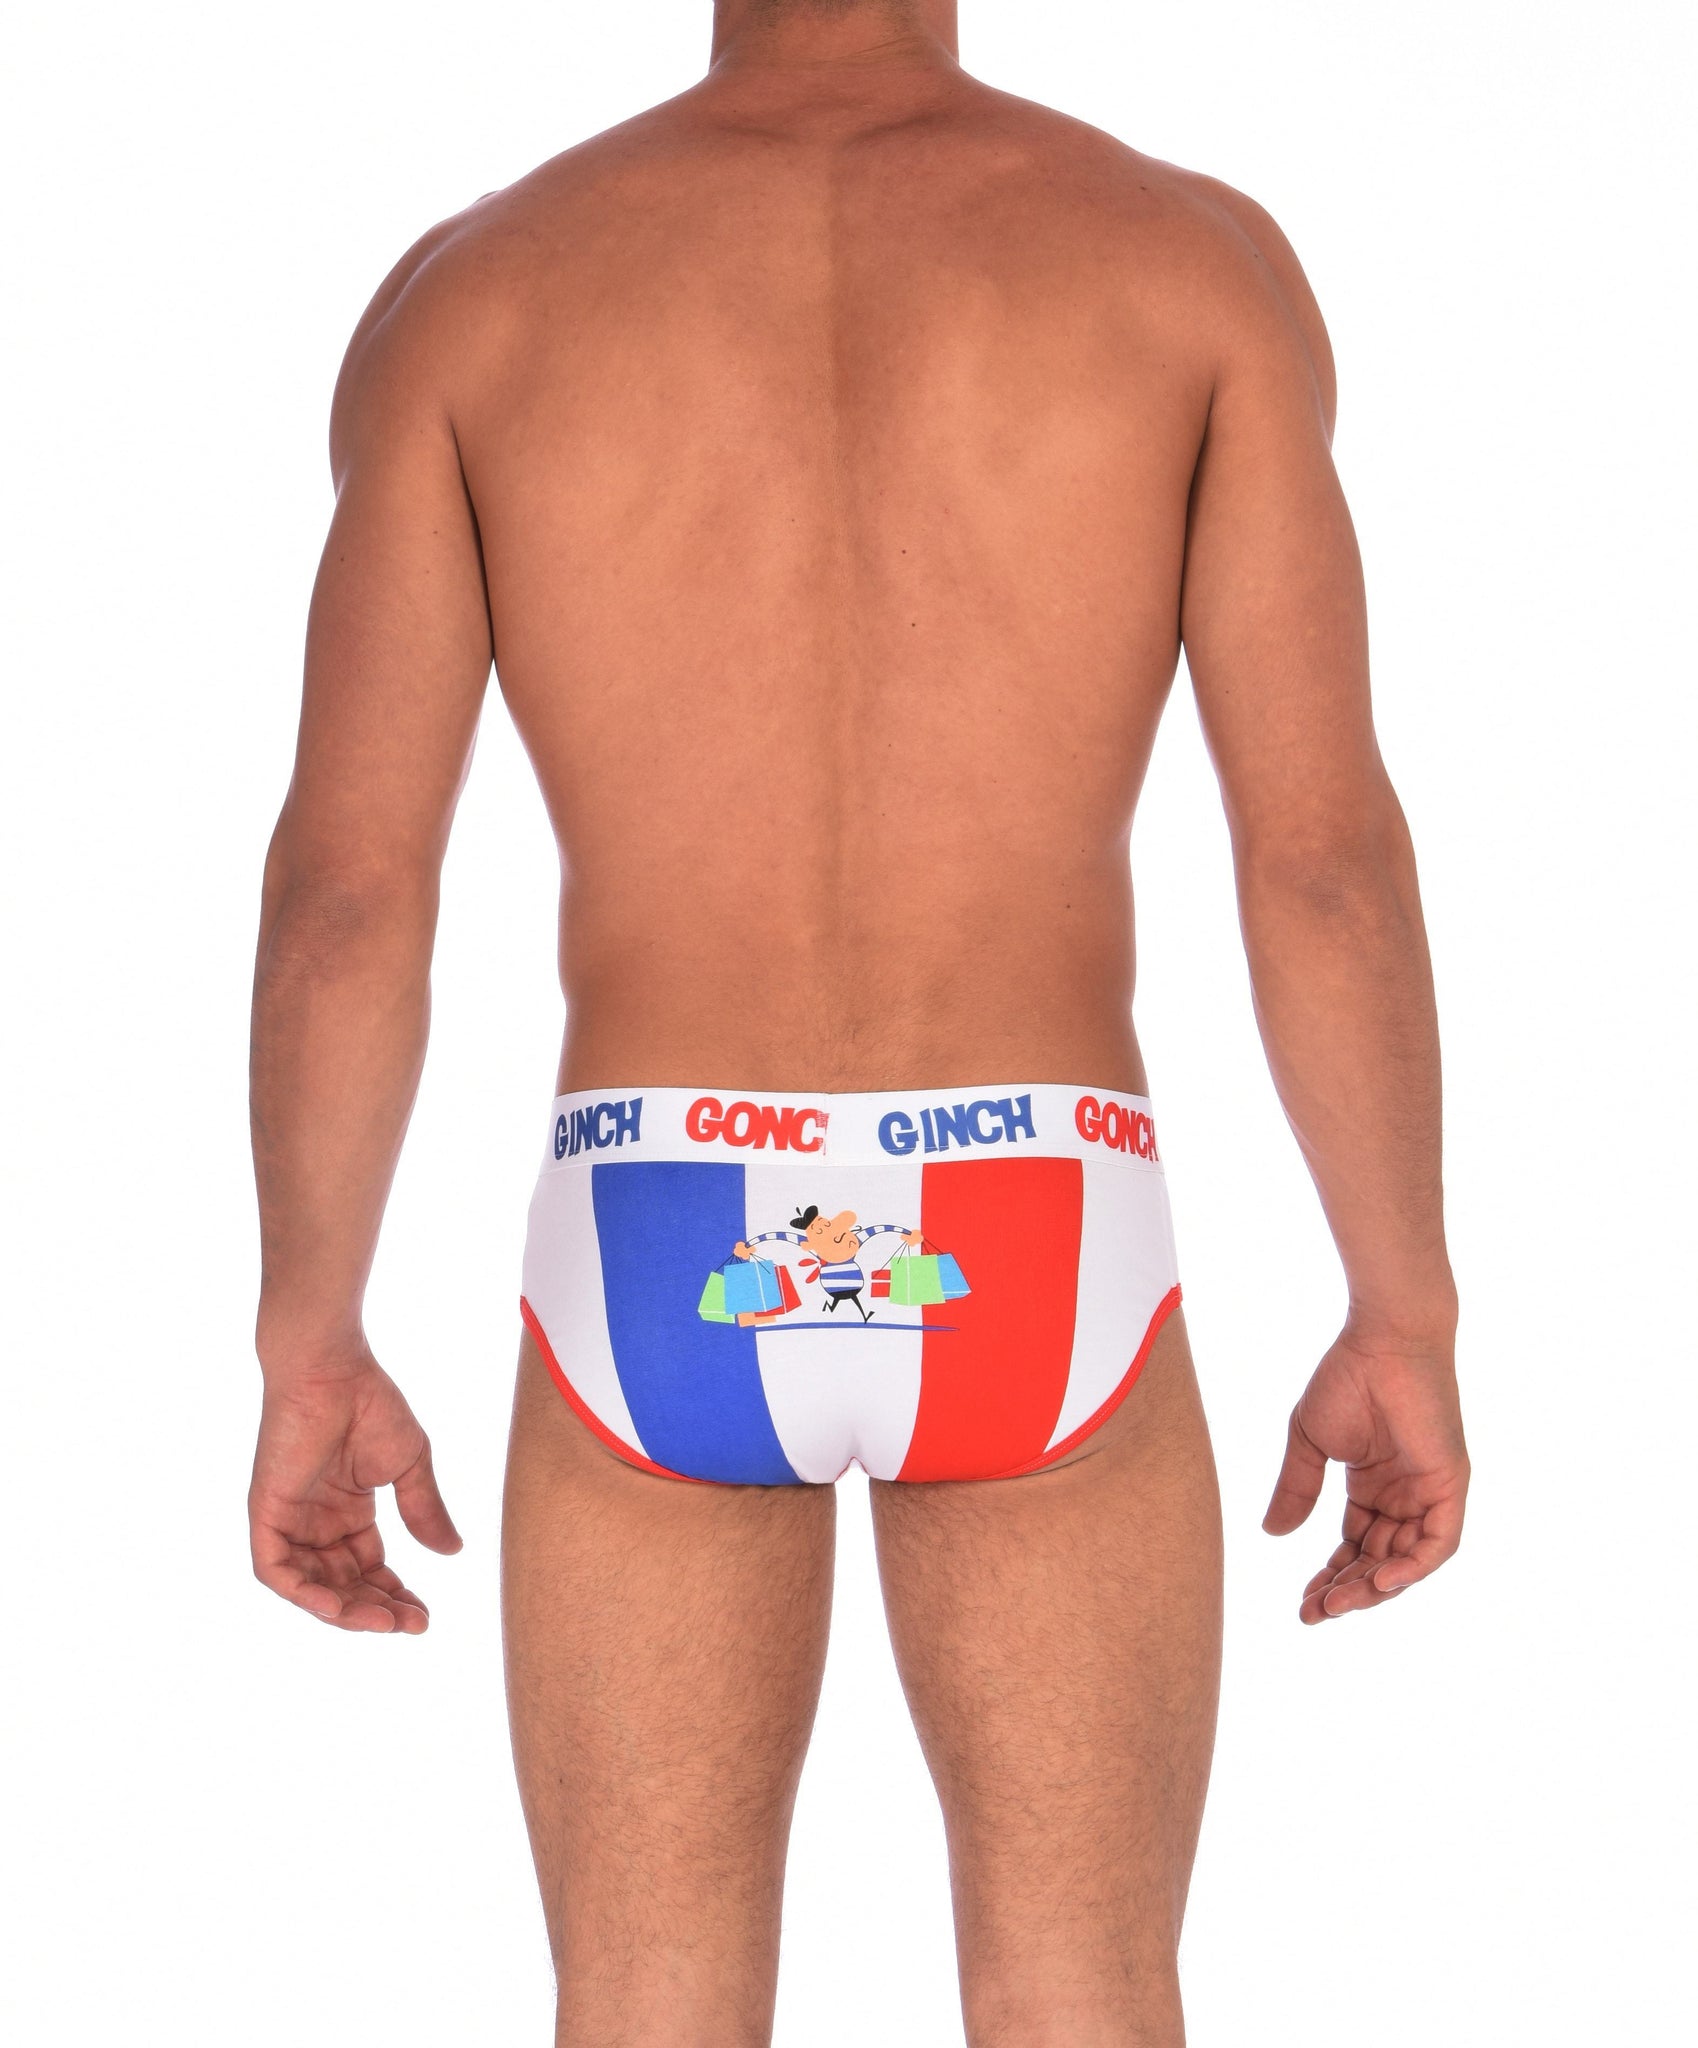 GG Ginch Gonch I Love Paris Low rise Brief - Men's Underwear white fabric with scene of french flag and french person red and white trim and white printed waistband back